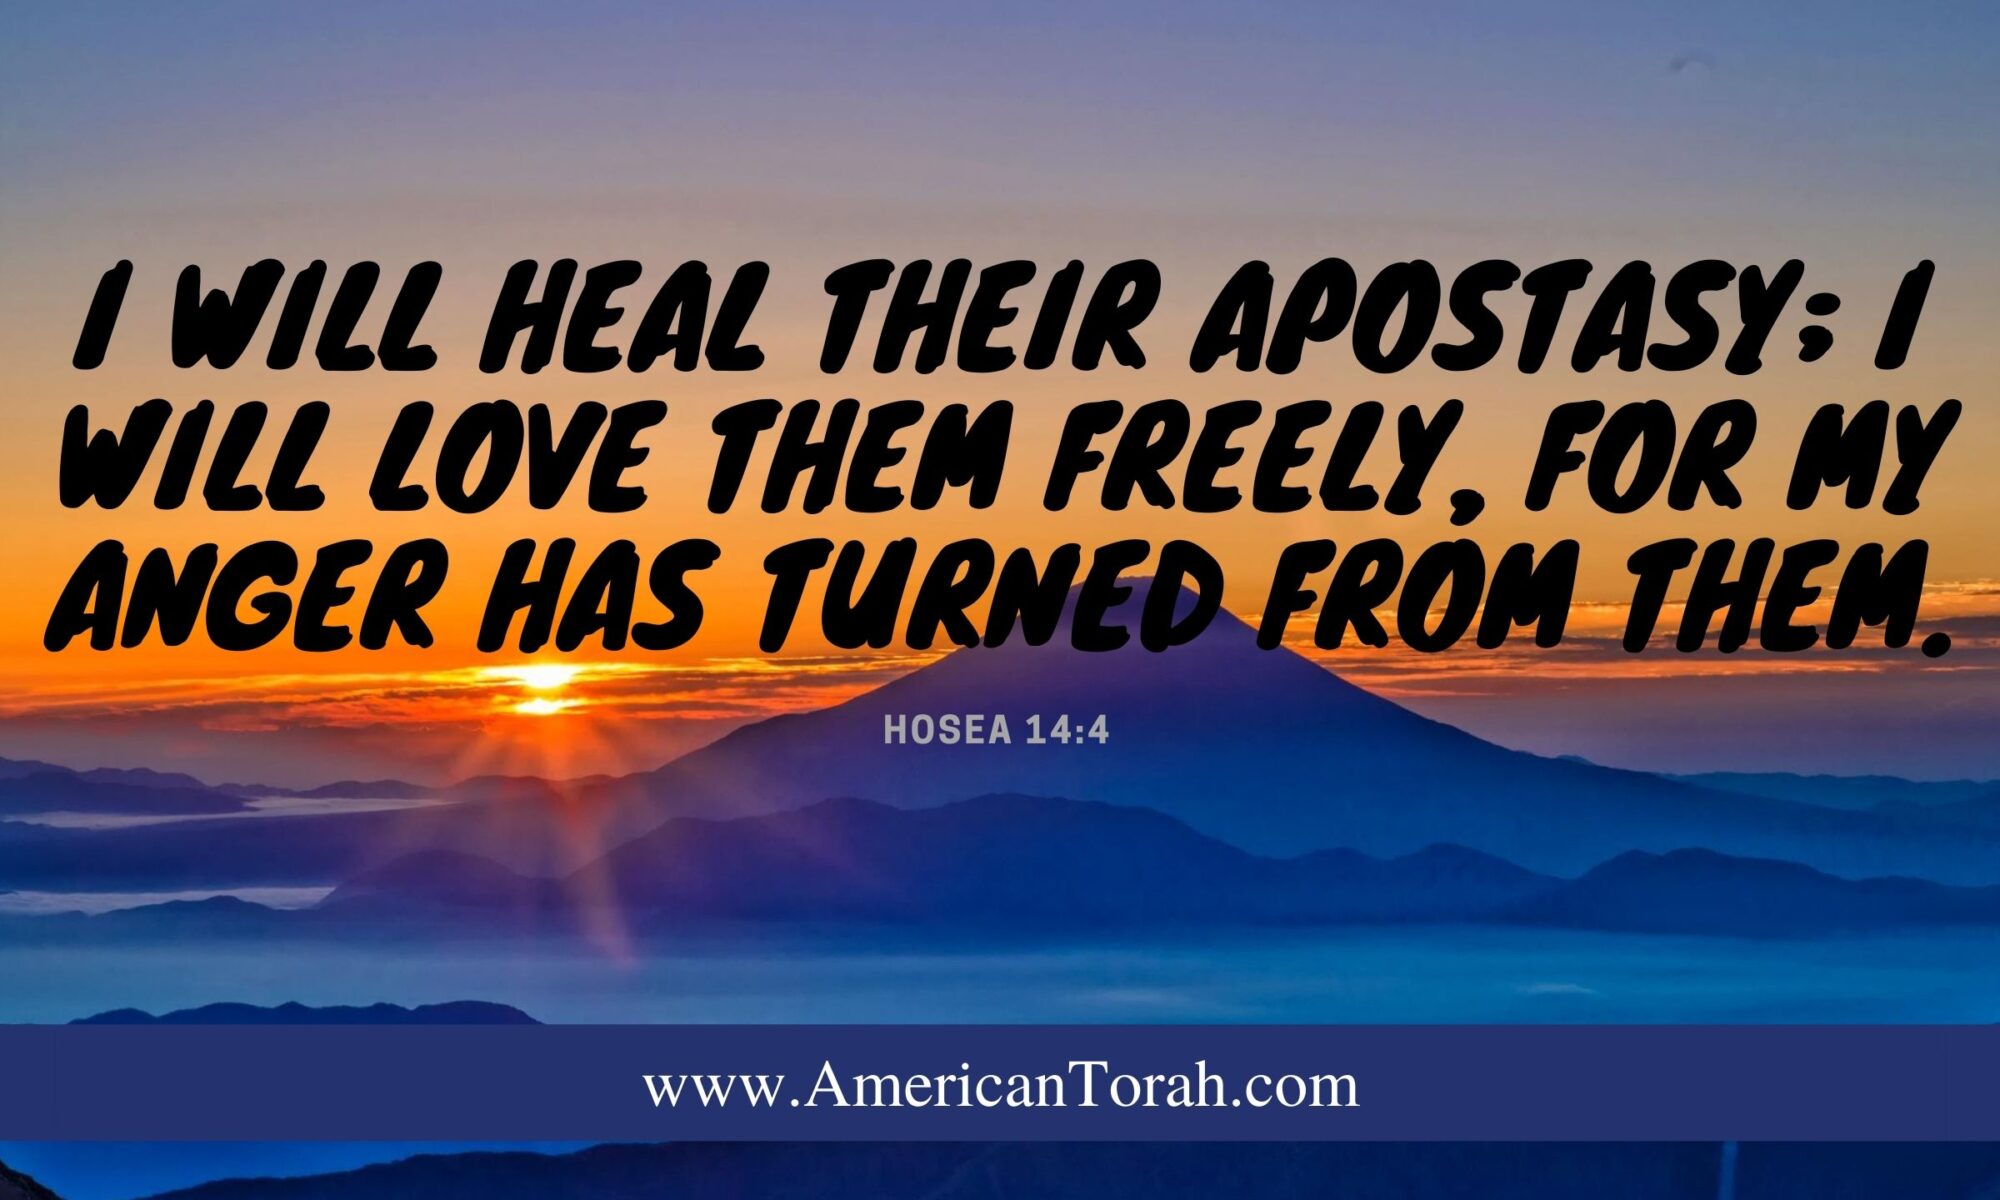 I will heal their apostasy; I will love them freely, for my anger has turned from them. Hosea 14:4